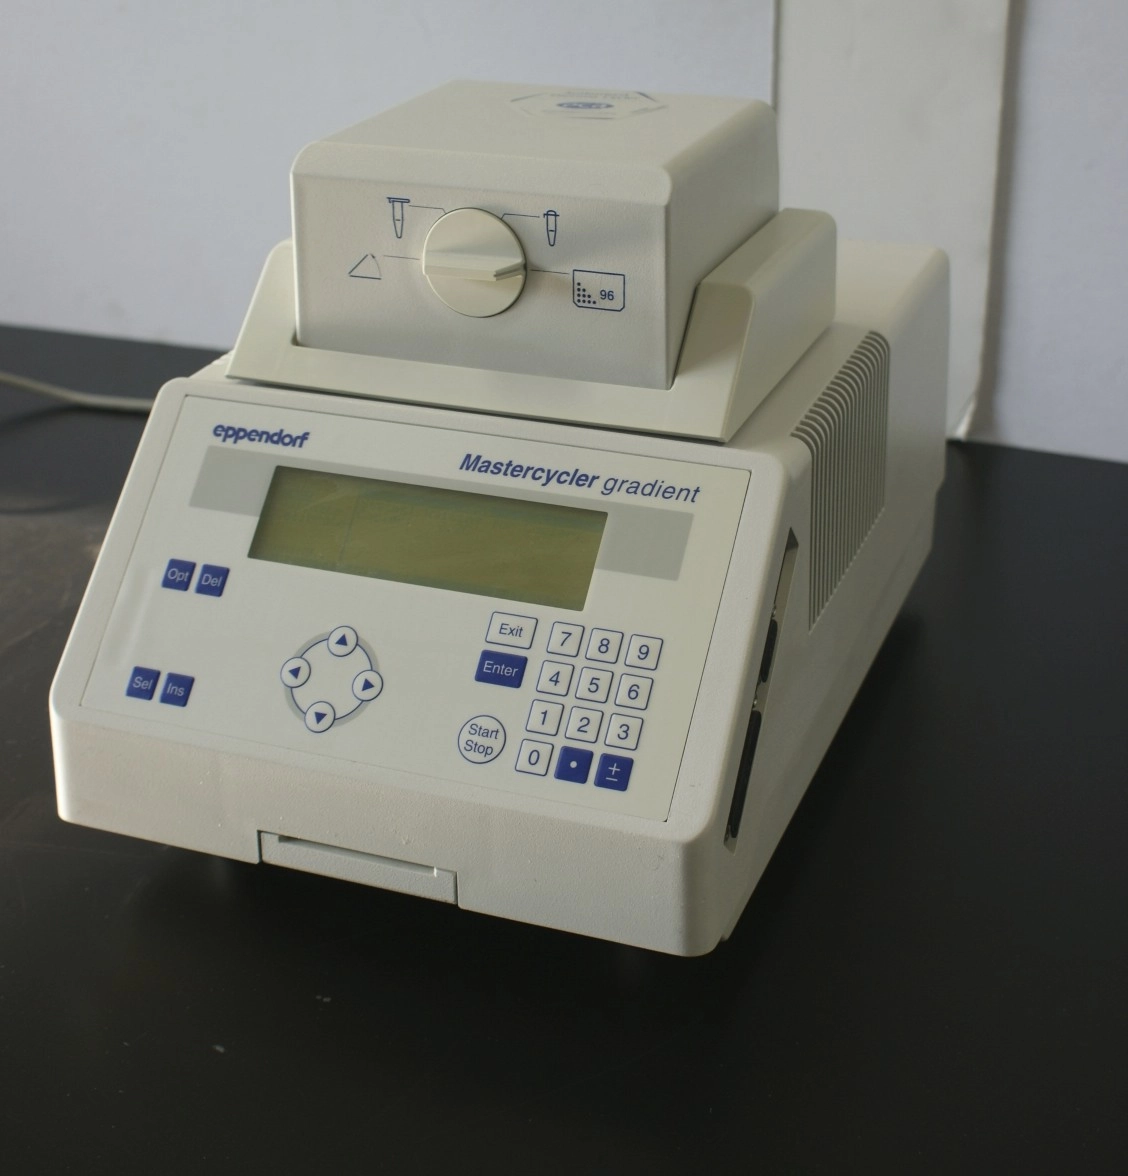 Eppendorf Mastercyler Gradient PCR System Eppendorf PCR Eppendorf 96 Well Plate PCR Eppendorf 5331 Eppendorf PCR Card used